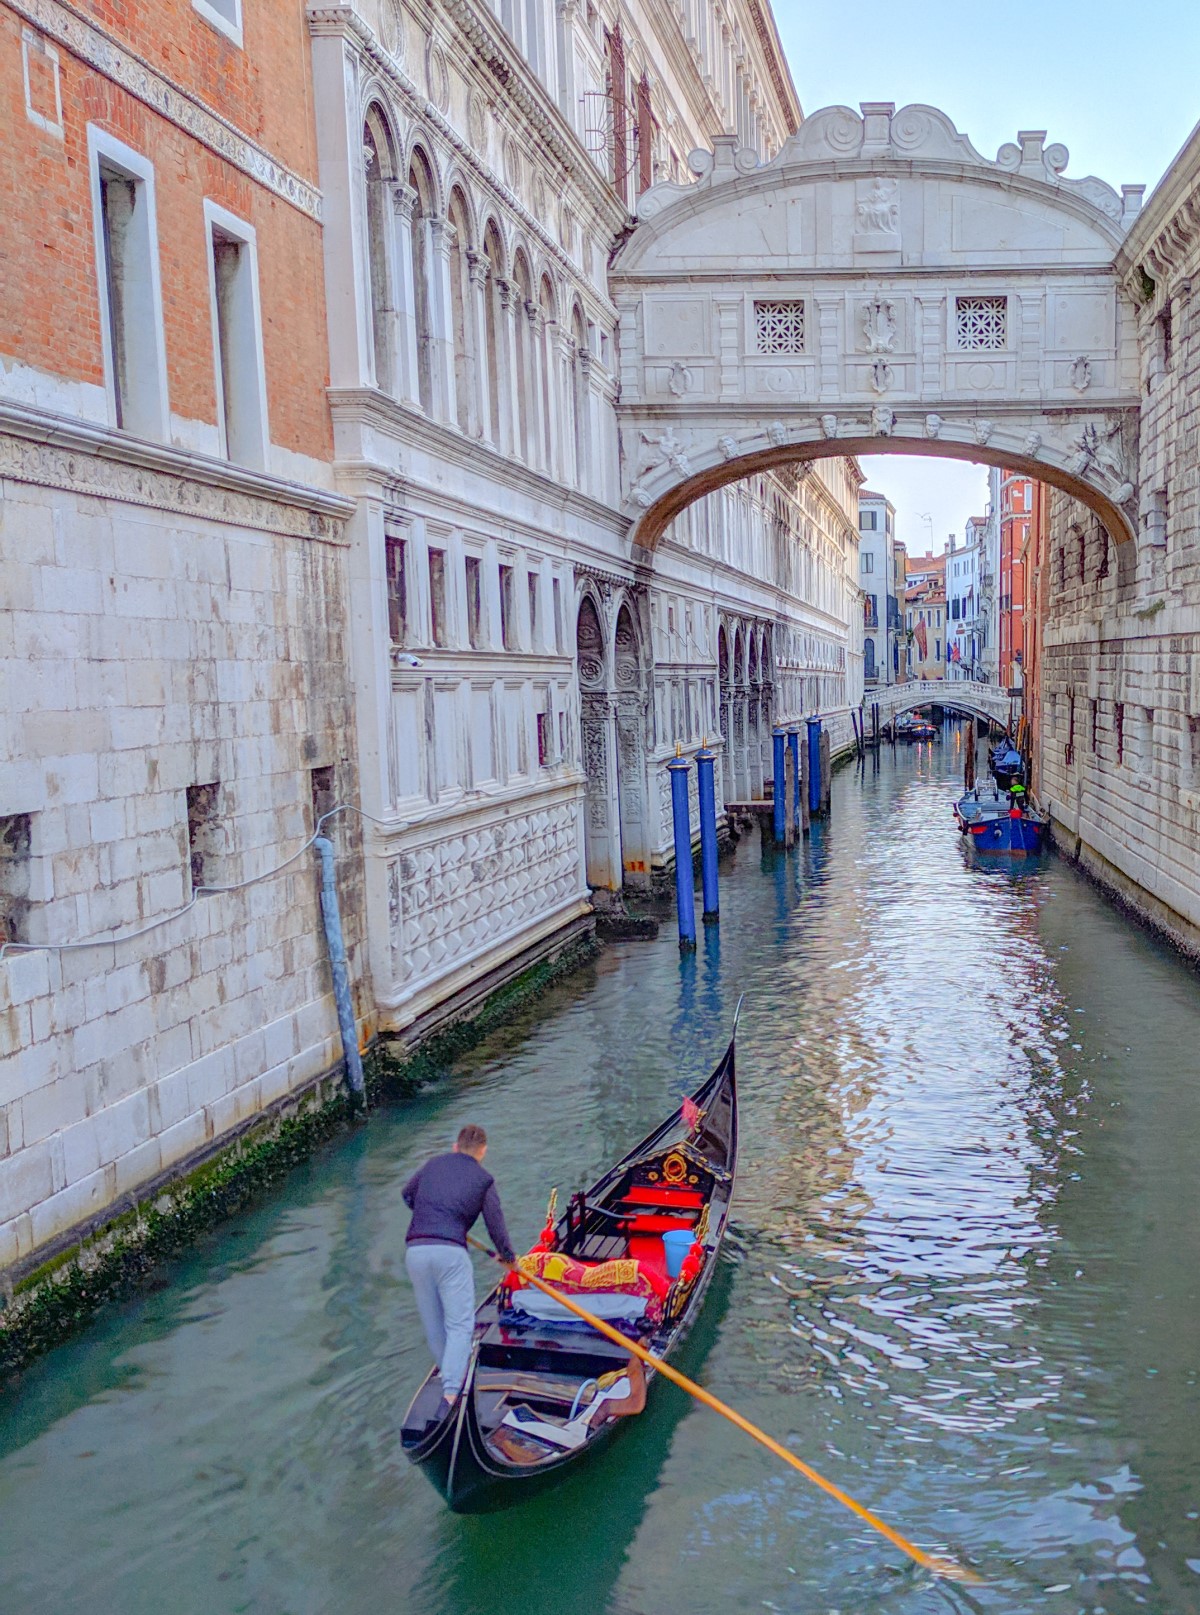 Legend has it the Bridge of Sighs was named because it offered prisoners their last view of Venice before execution. I like the legend of eternal love better...